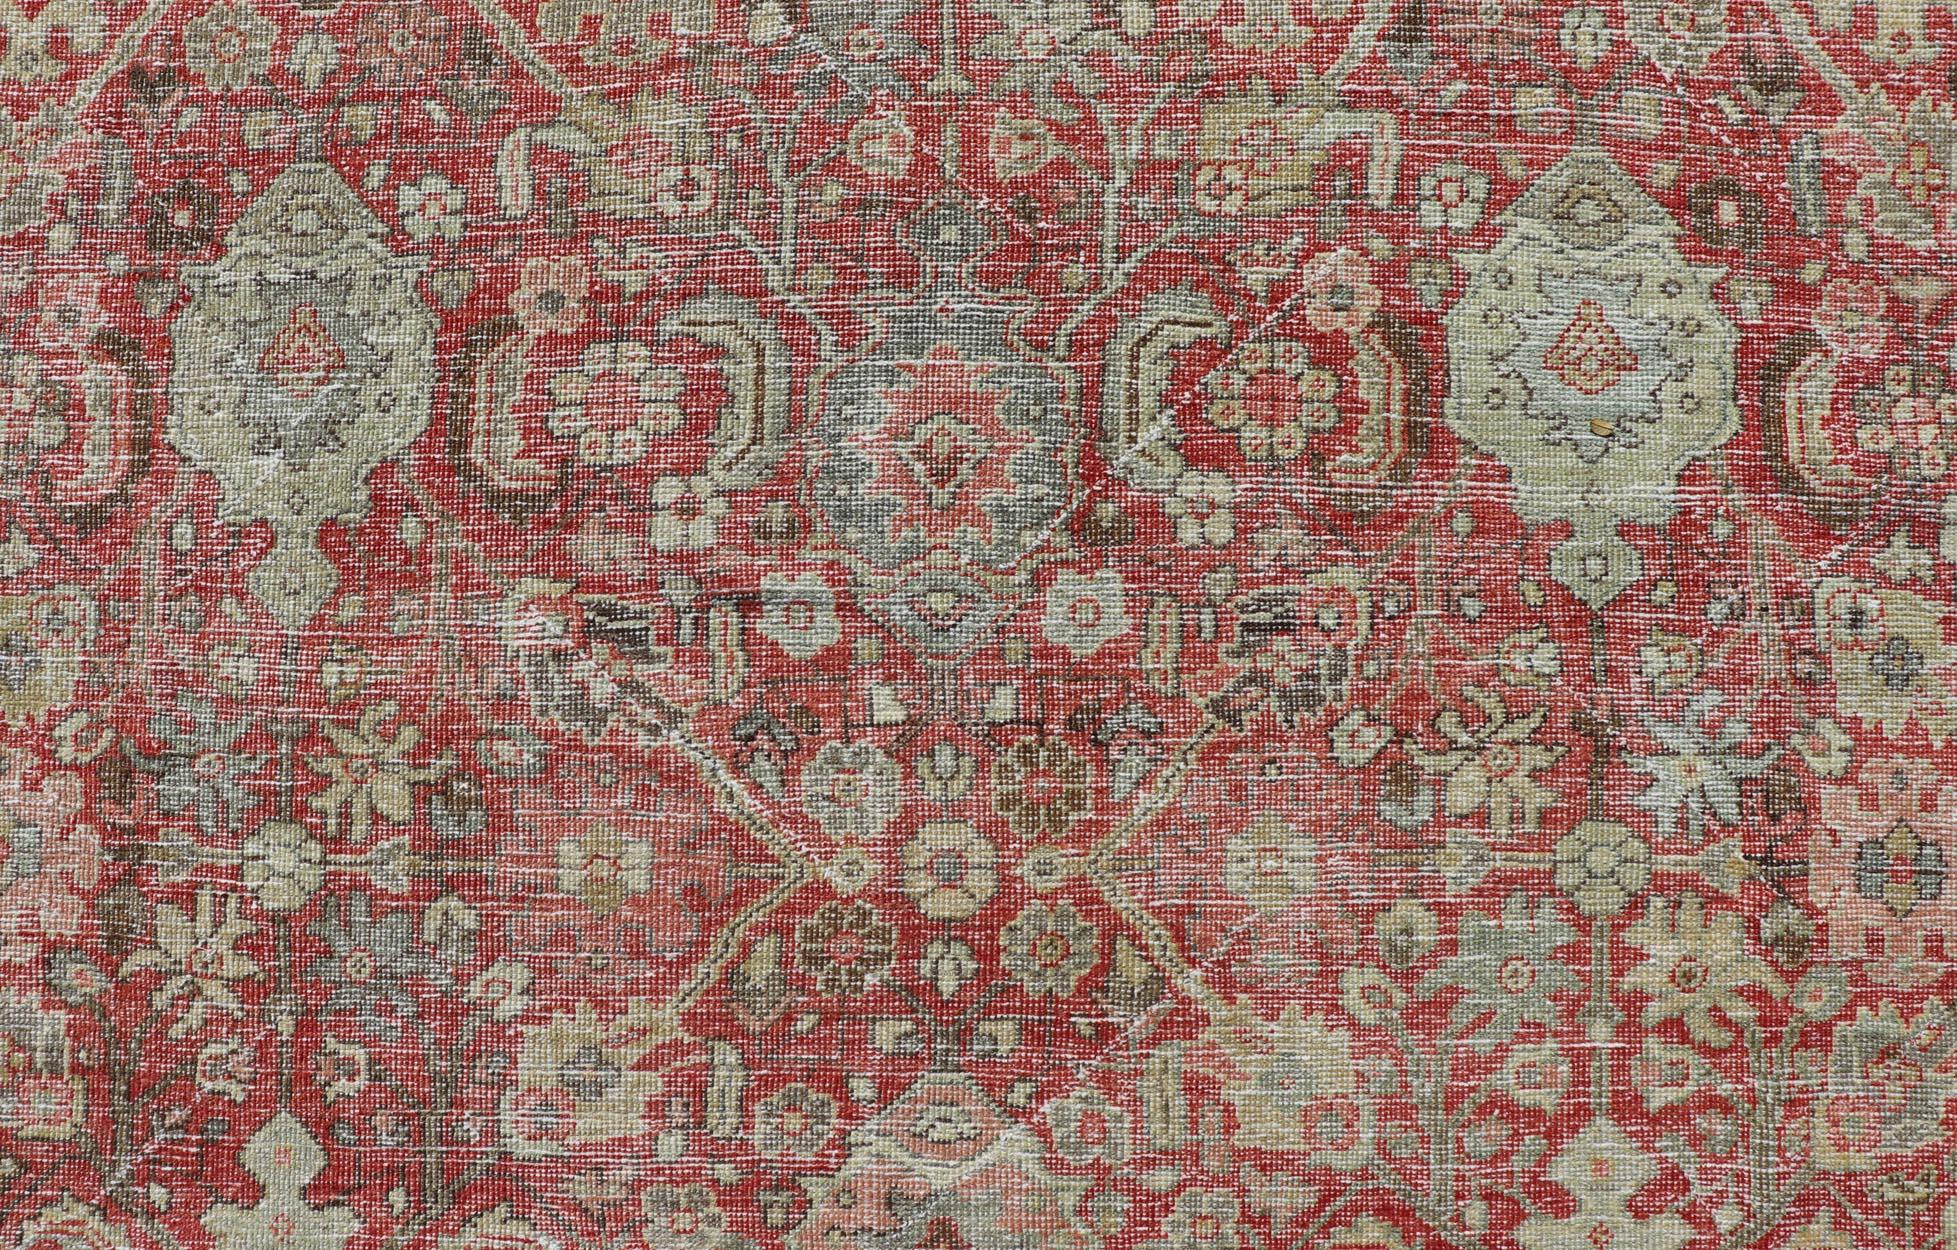 Antique Persian Colorful Mahal Rug with All over Floral Design on a Red Field  For Sale 5